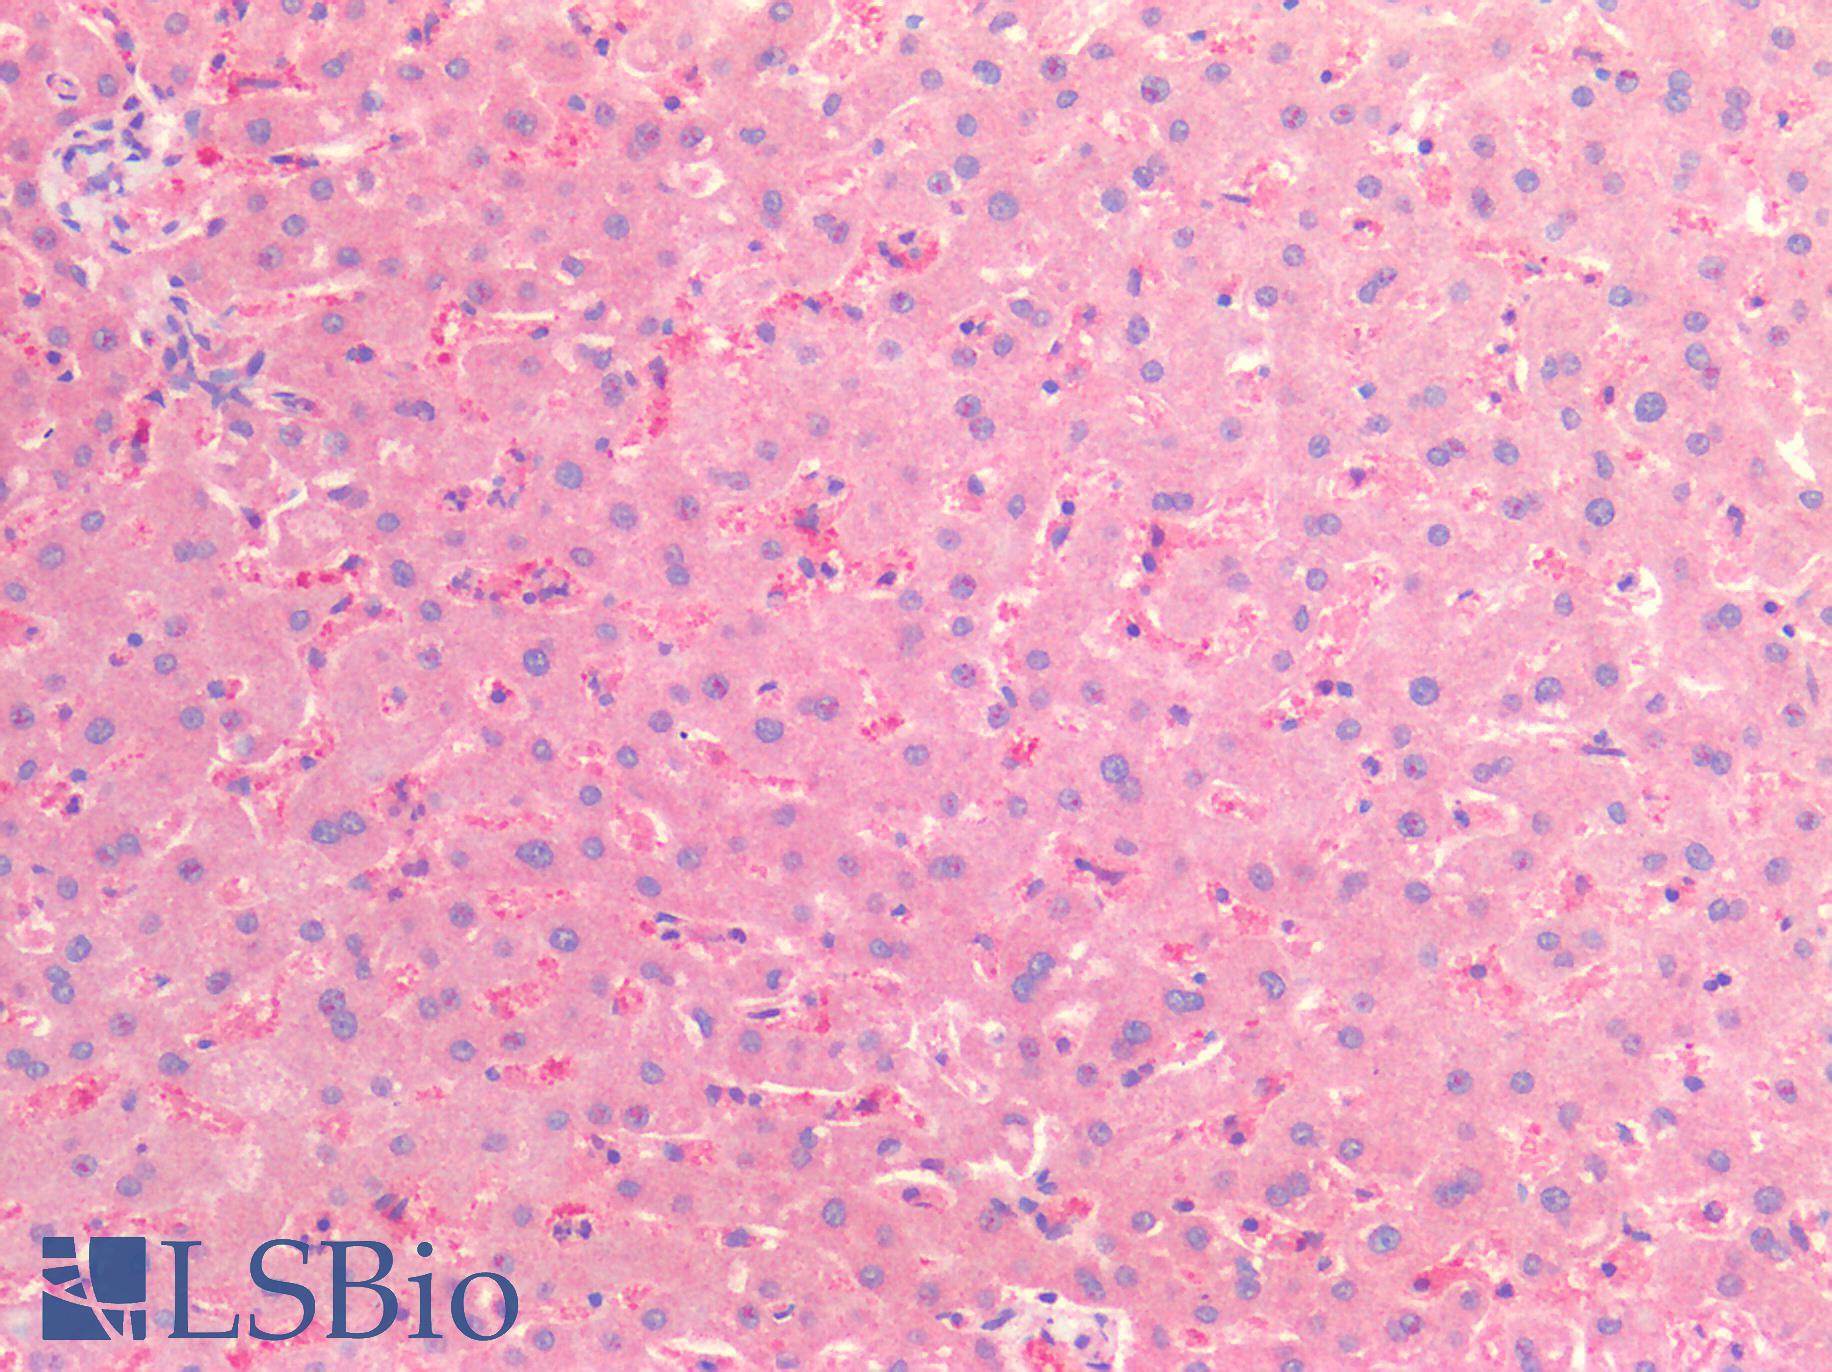 CSPG4 / NG2 Antibody - Human Liver: Formalin-Fixed, Paraffin-Embedded (FFPE)